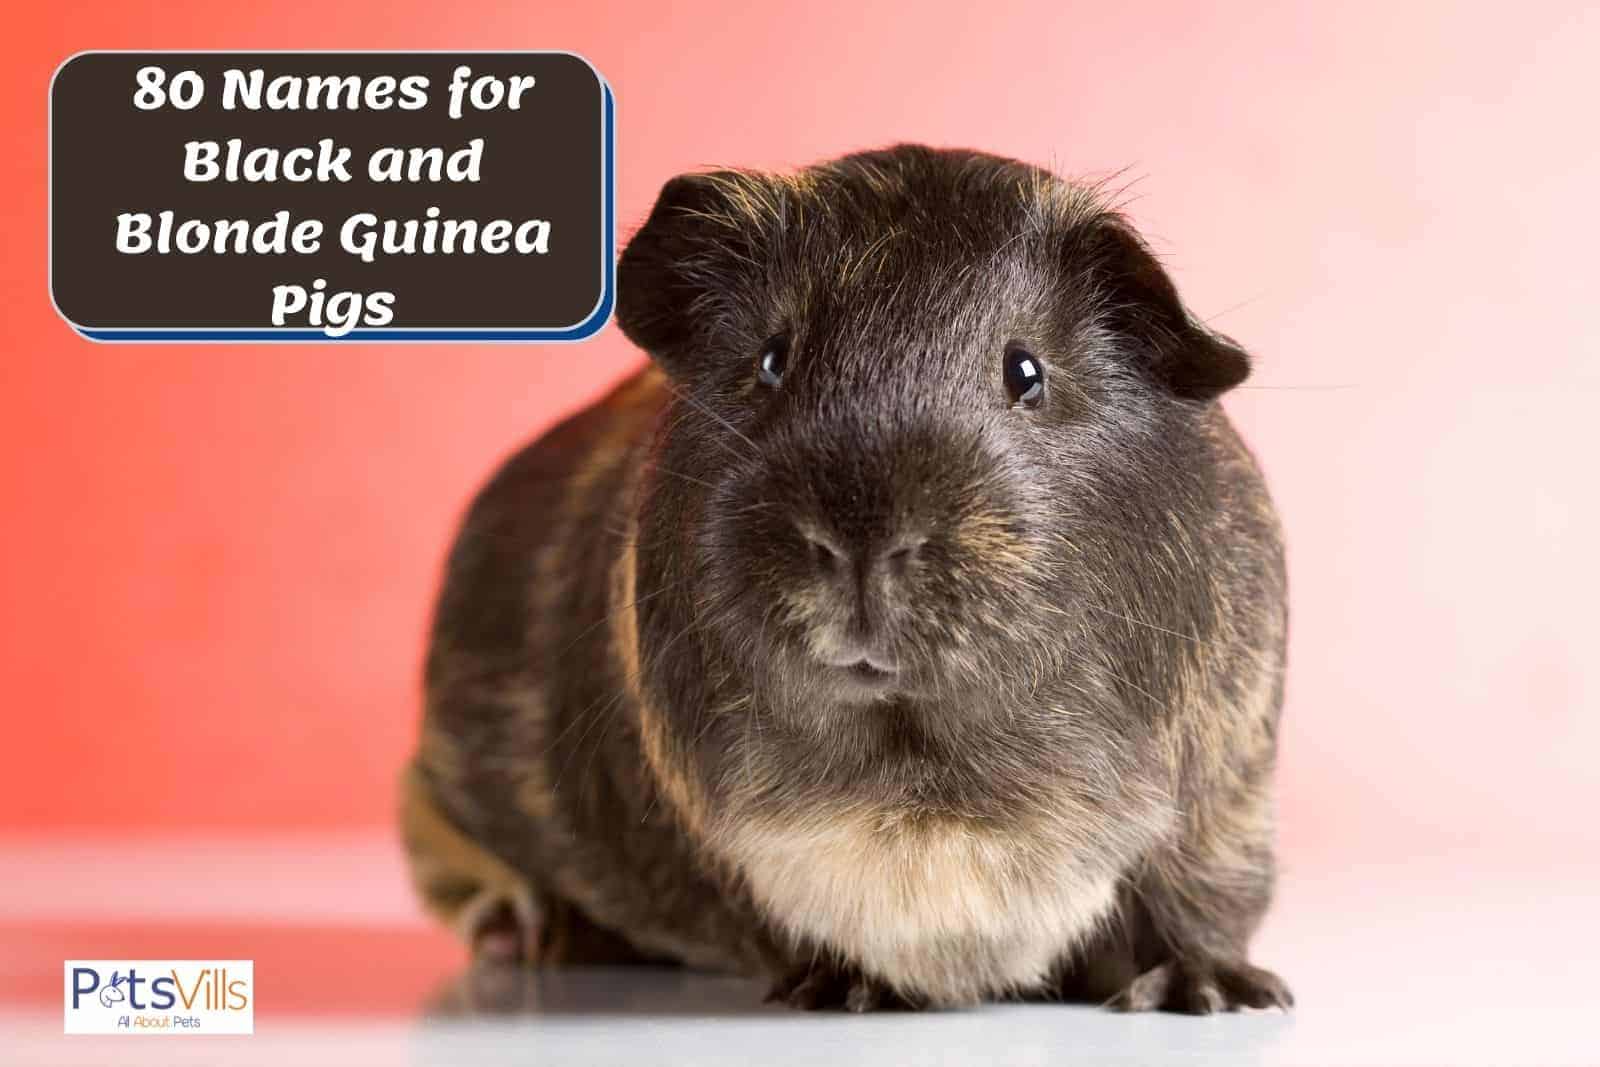 a cute black and blonde cavy suitable with any names for black and blonde guinea pigs